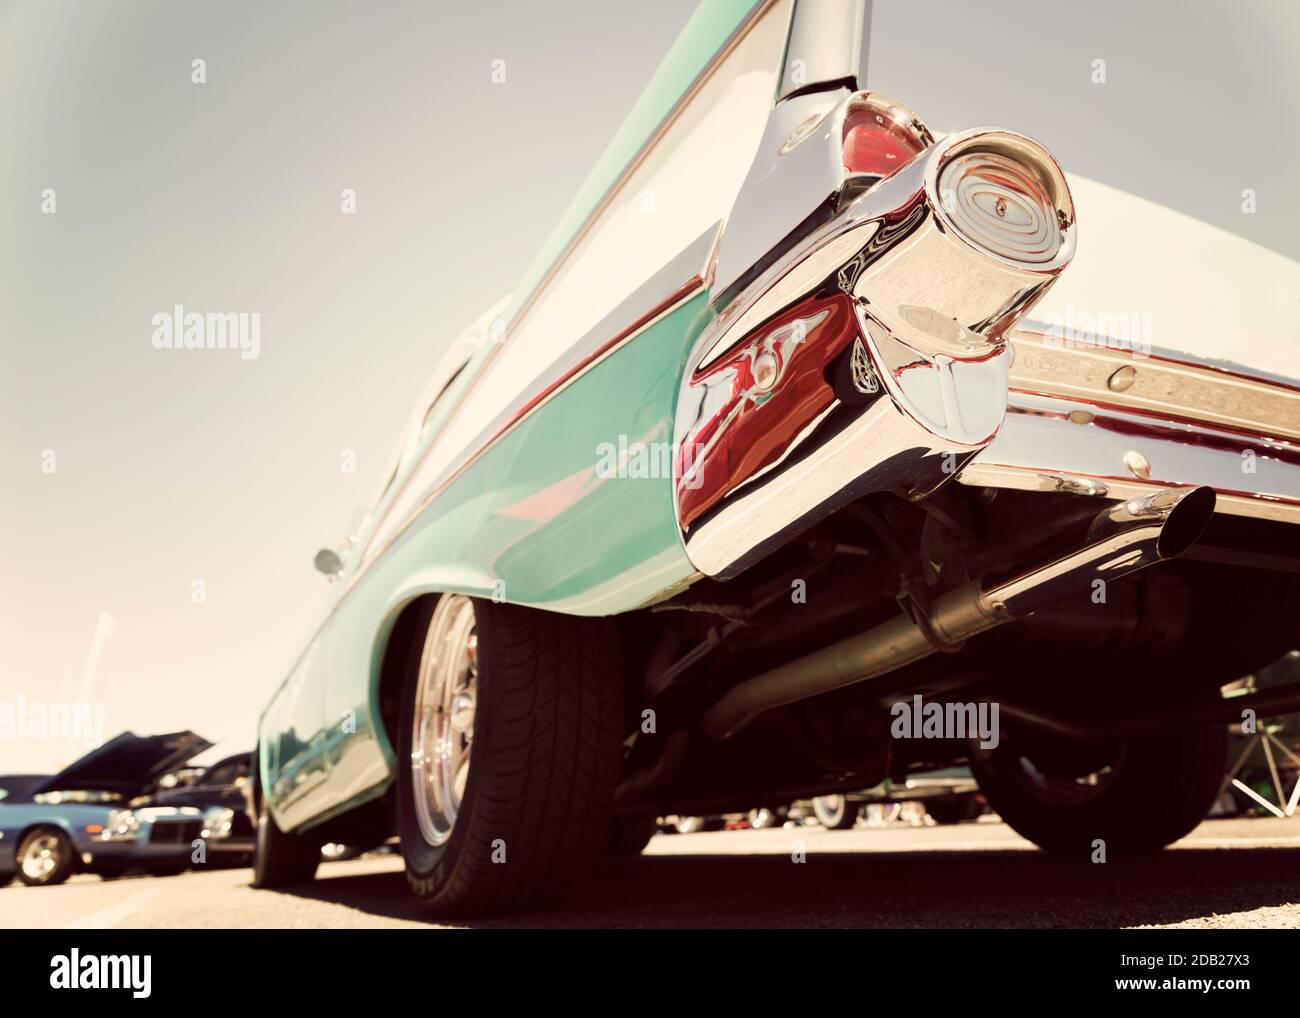 Classic american car in vintage color, low angle photograph Stock Photo